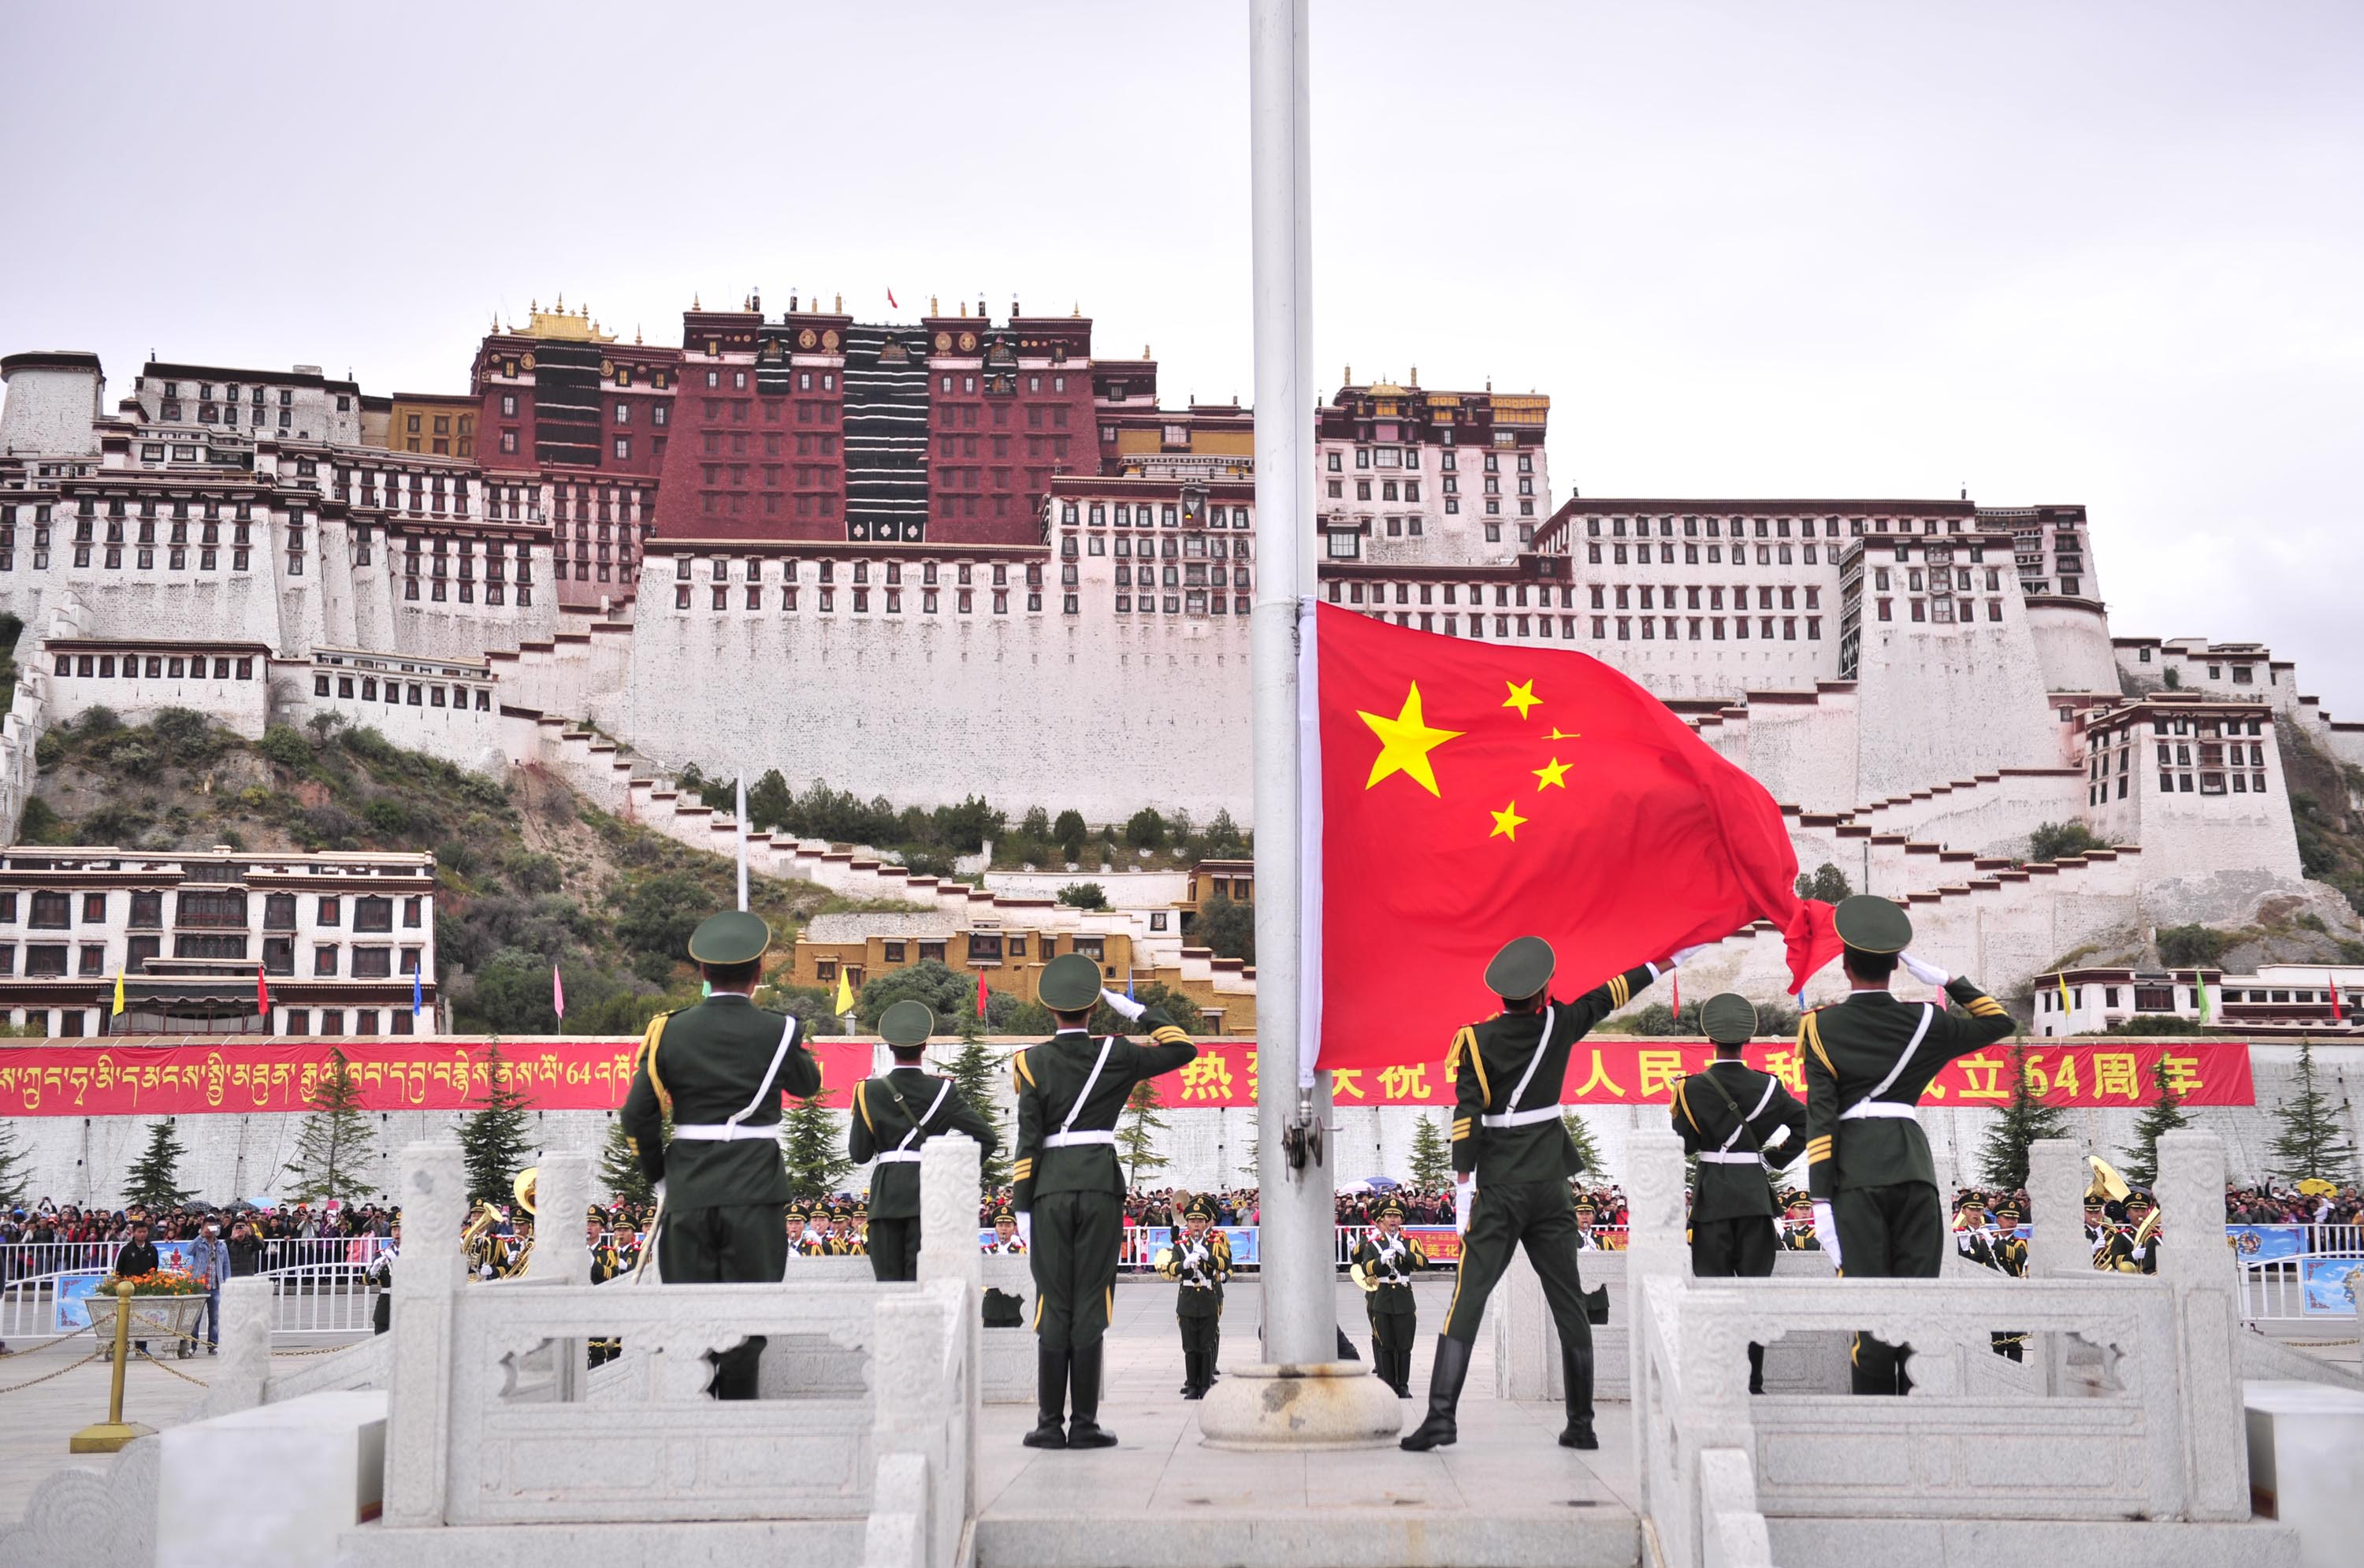 Soldiers at a flag-raising ceremony in front of the Potala Palace in Lhasa, capital of southwest China's Tibet Autonomous Region. Photo: Xinhua